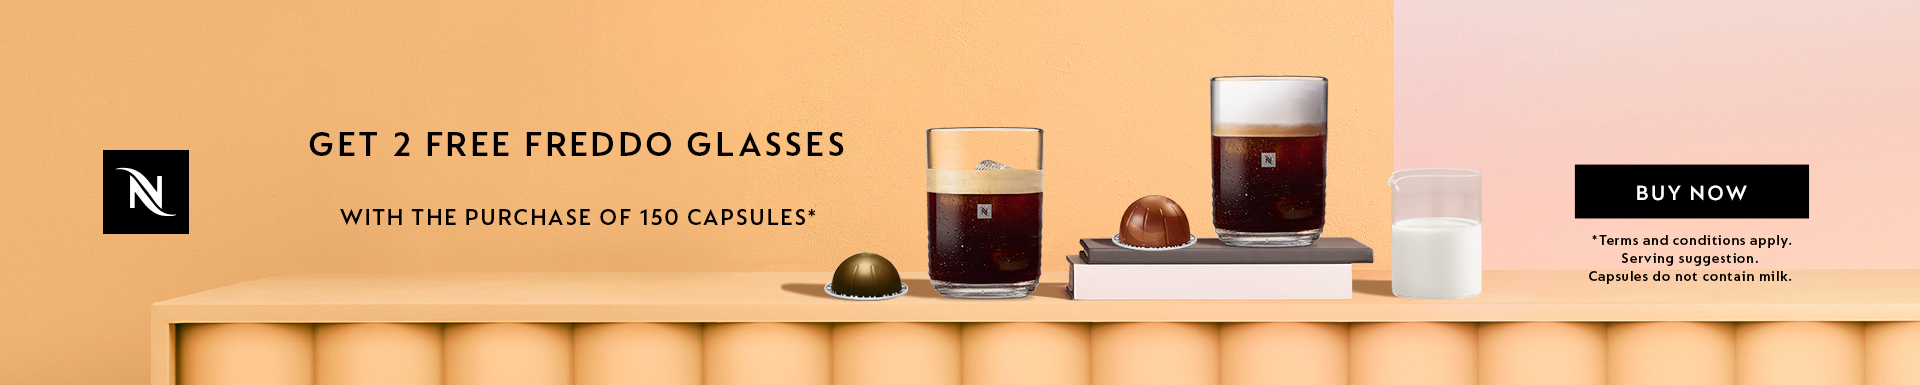 Free Barista glasses with the purchase of 160 capsules